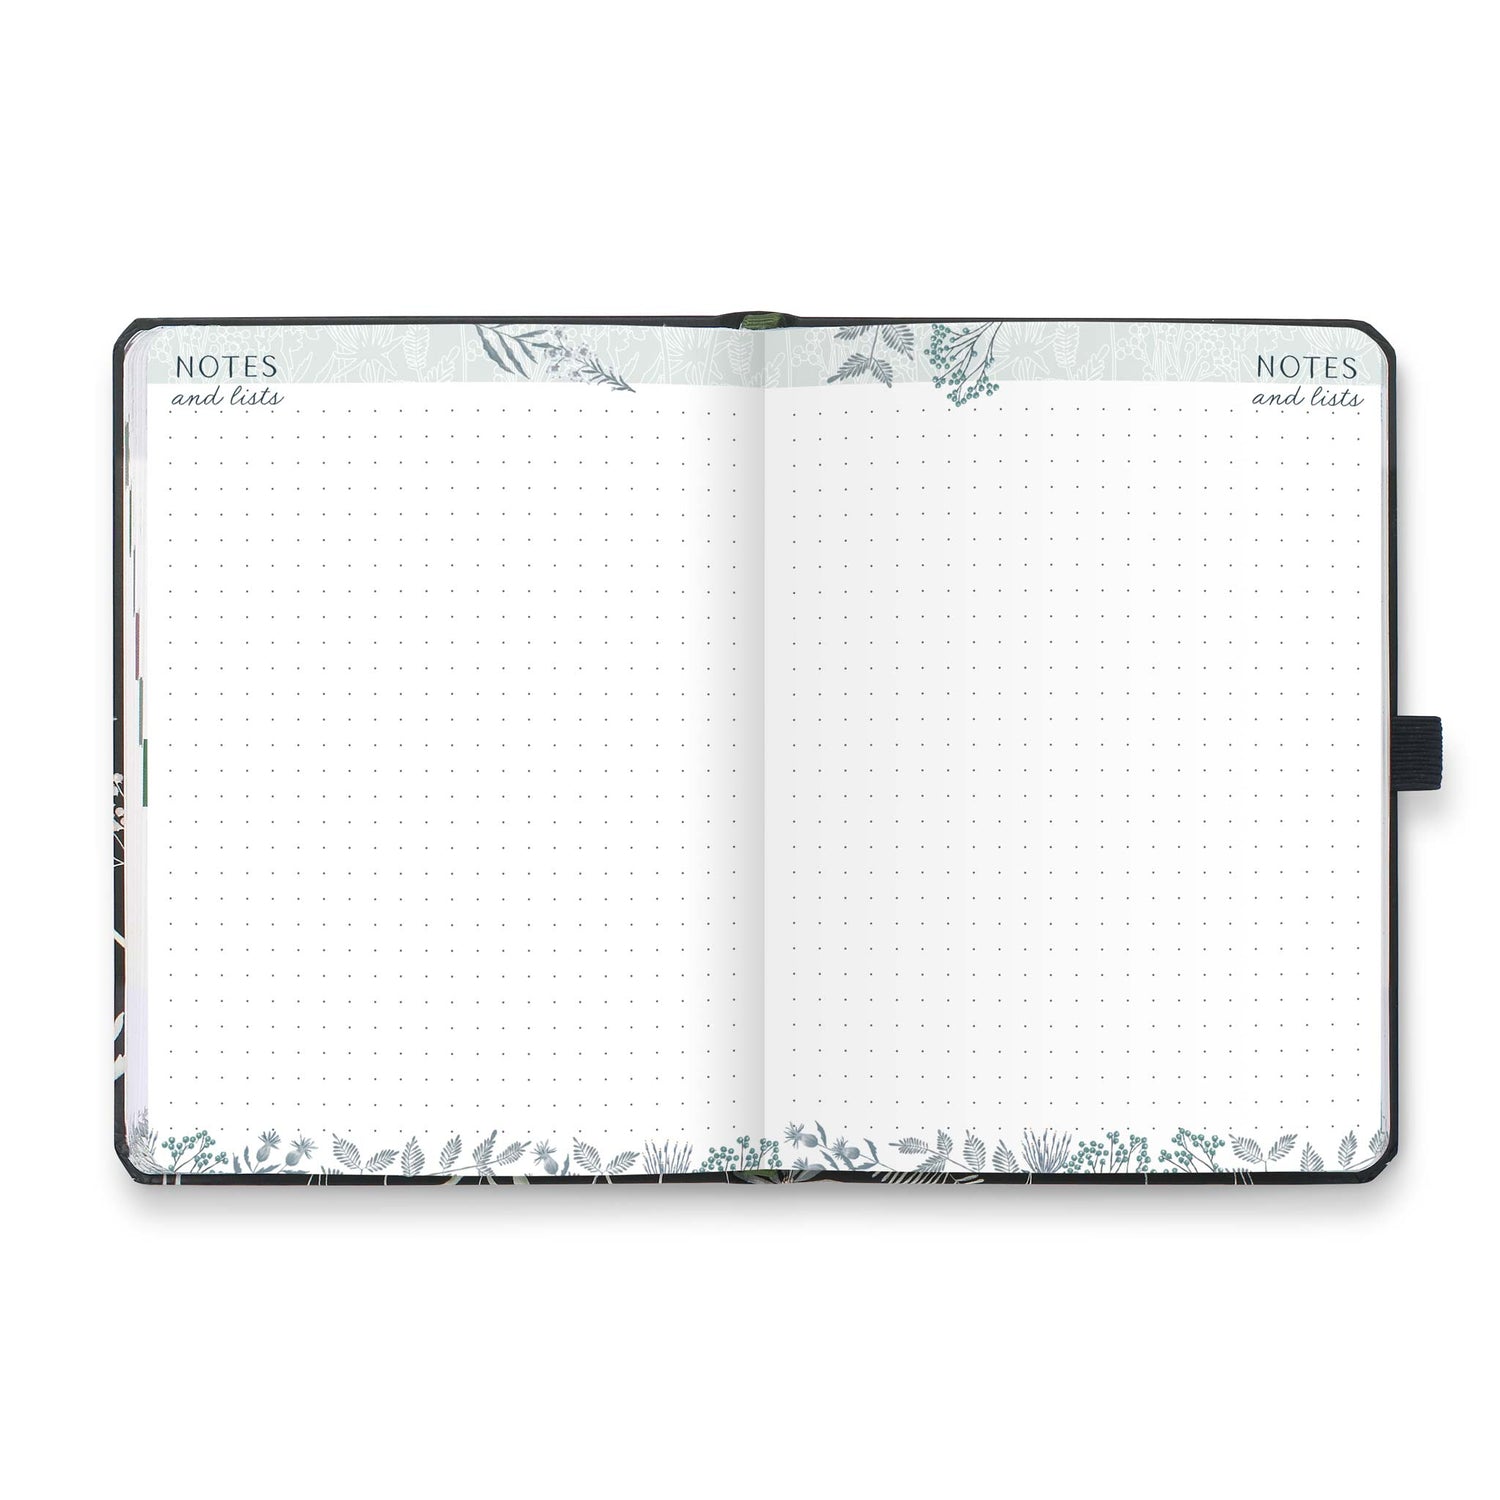 An open diary with dotted notes and lists pages